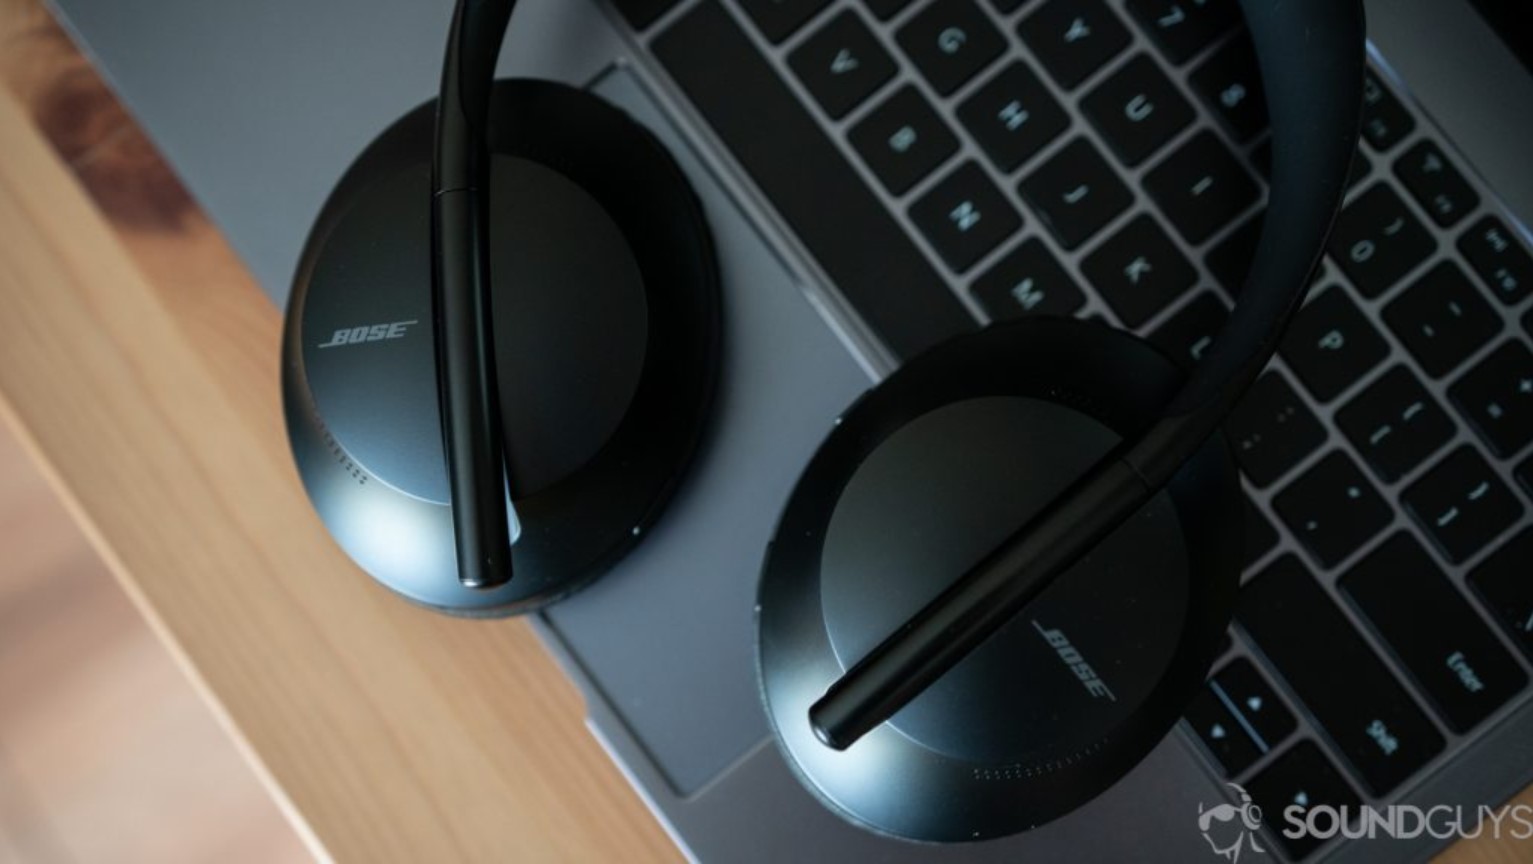 An image of the Bose Noise Cancelling Headphones 700 laying on a keyboard